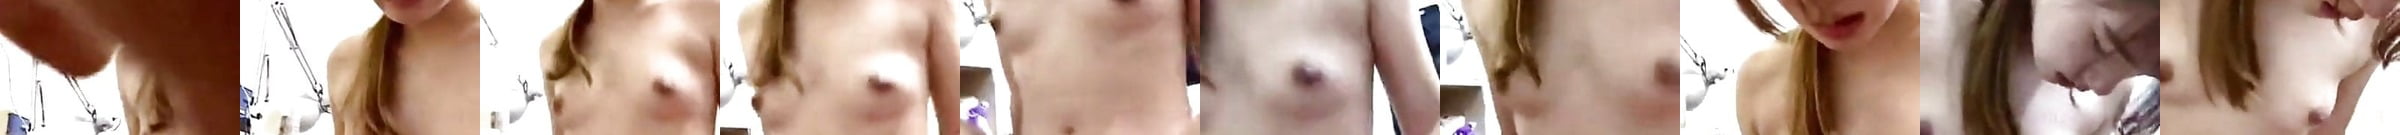 Nice Small Tits Porn Videos Xhamster